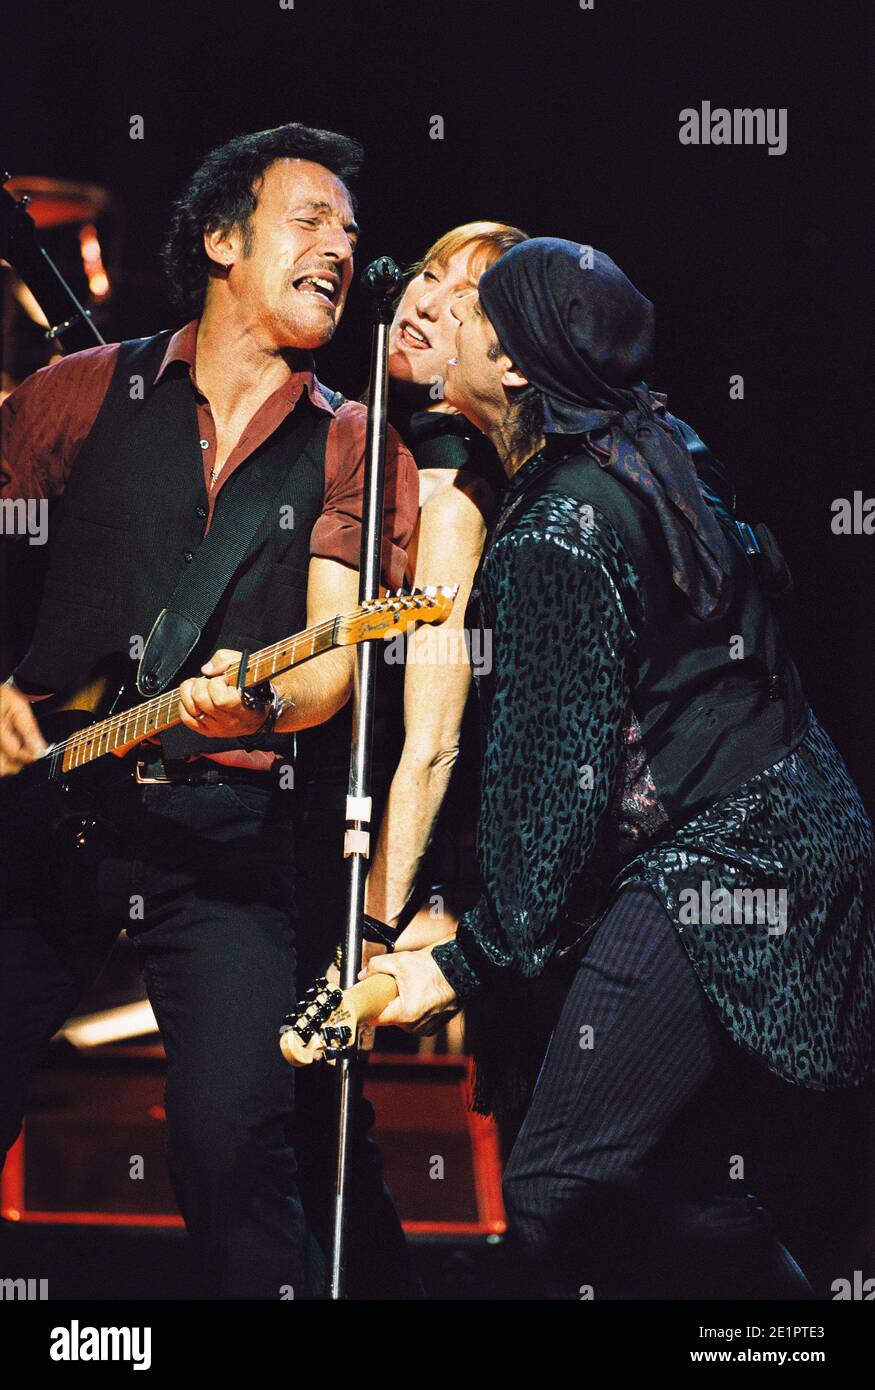 Bruce Springsteen and the E Street band in concert at Wembley Arena, London, UK. 27th October 2002. Stock Photo